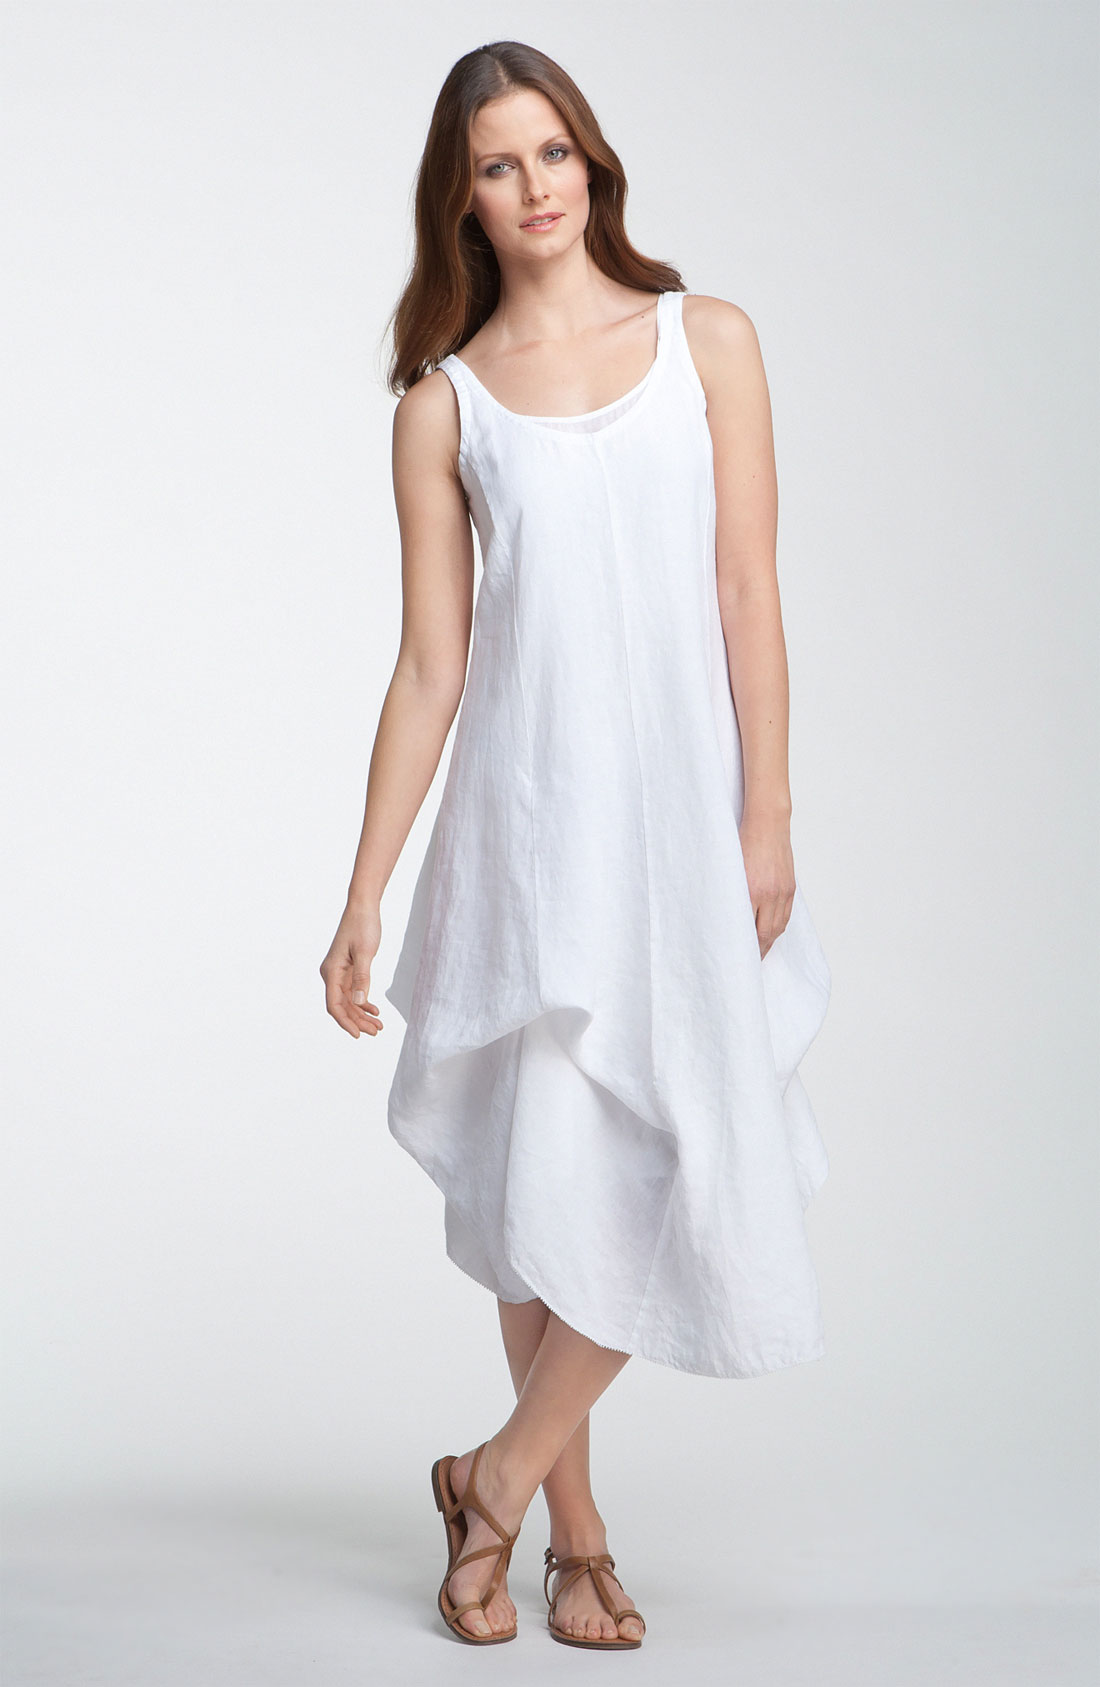 Eileen Fisher Convertible Cotton Dress in White | Lyst